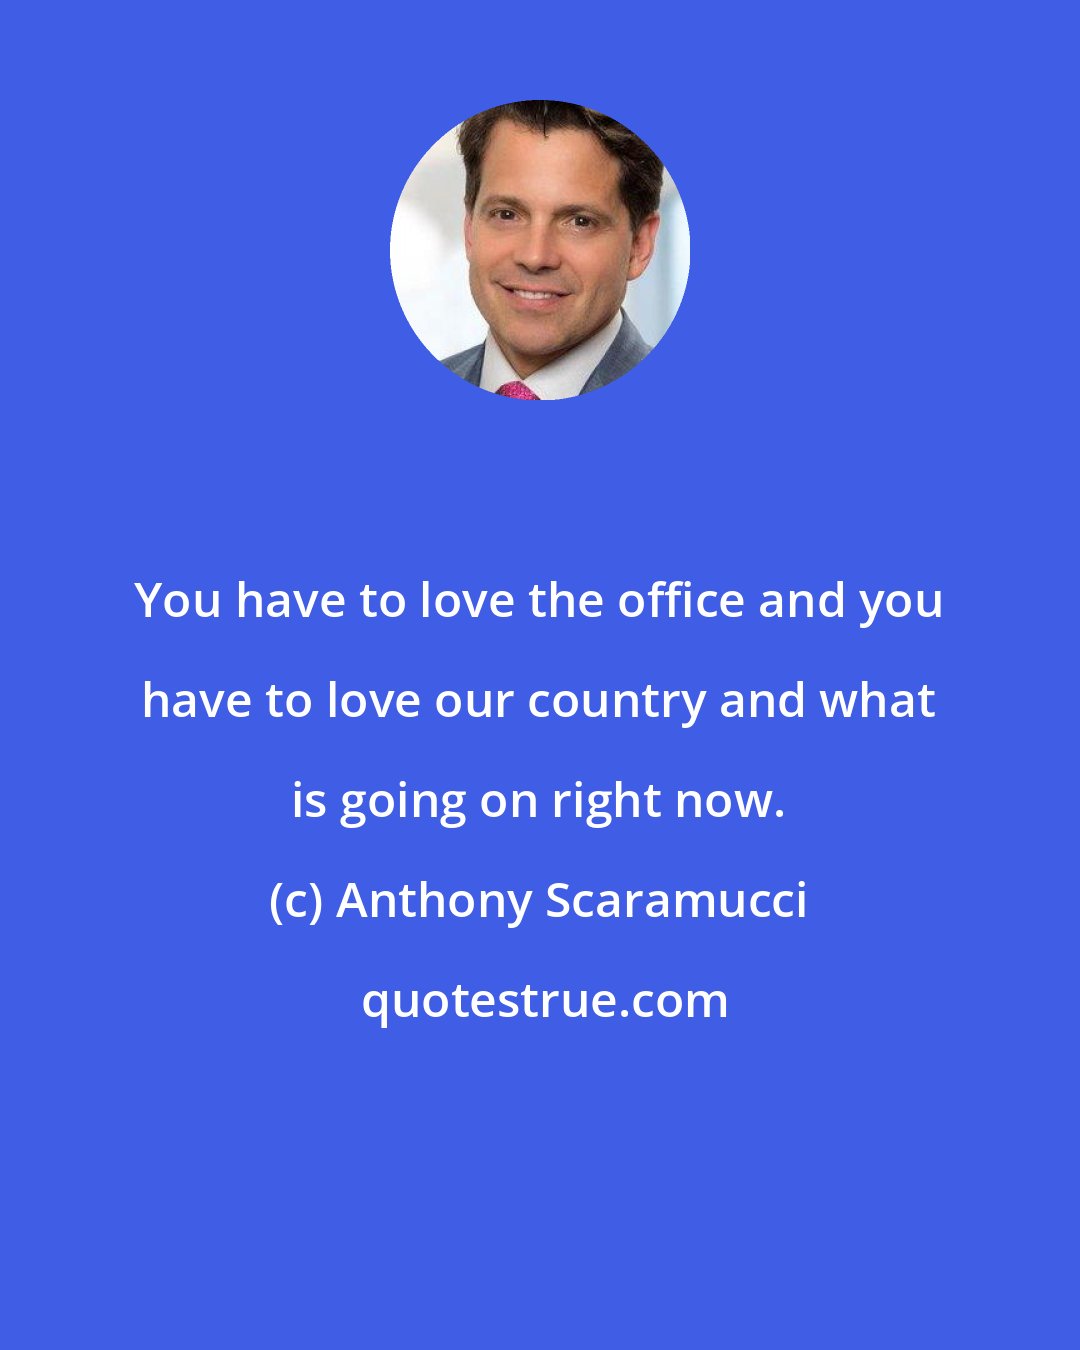 Anthony Scaramucci: You have to love the office and you have to love our country and what is going on right now.